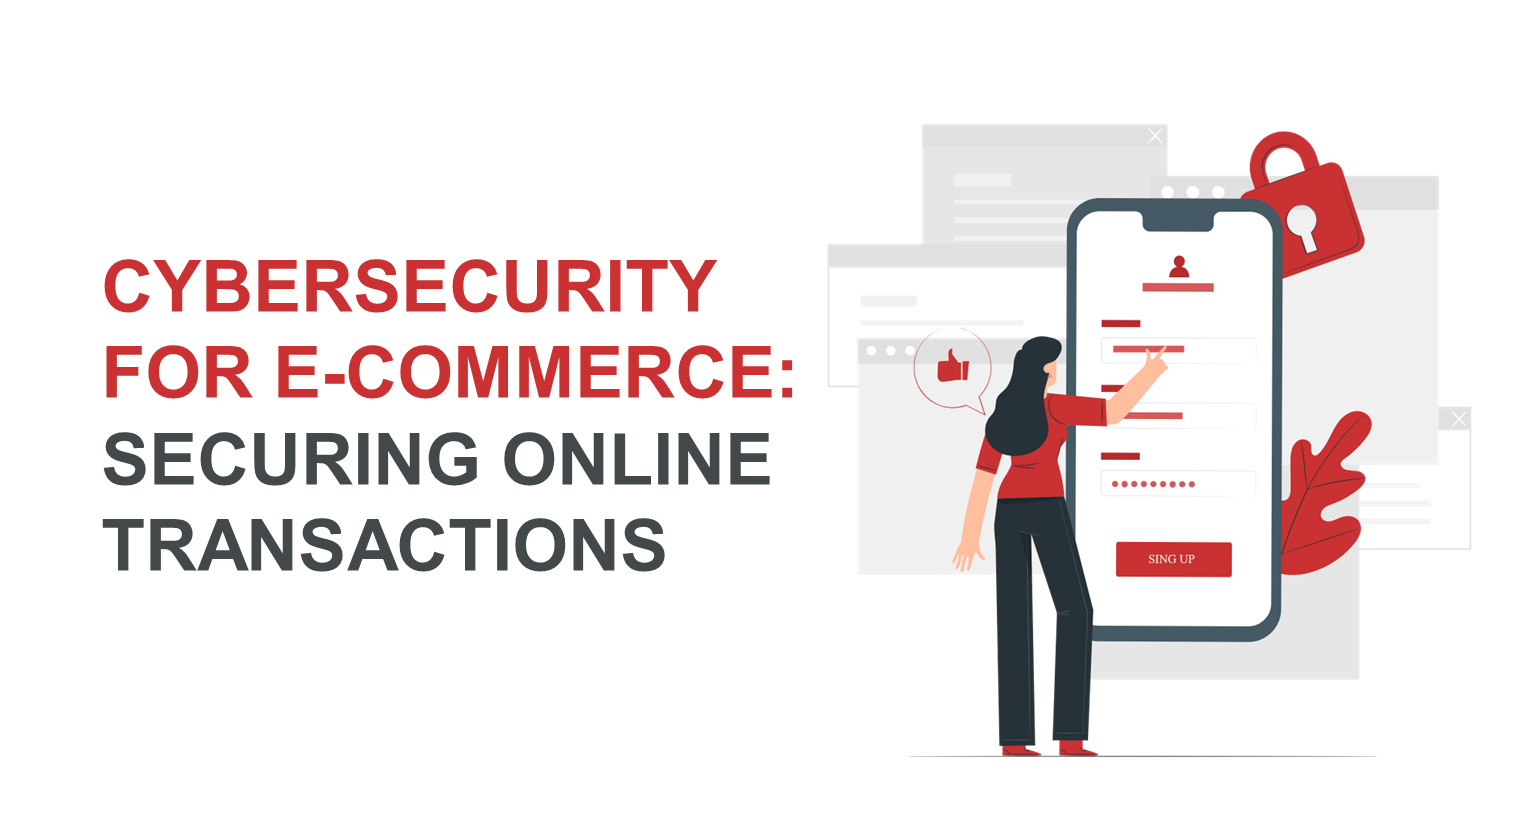 Cybersecurity for E-commerce: Securing Online Transactions